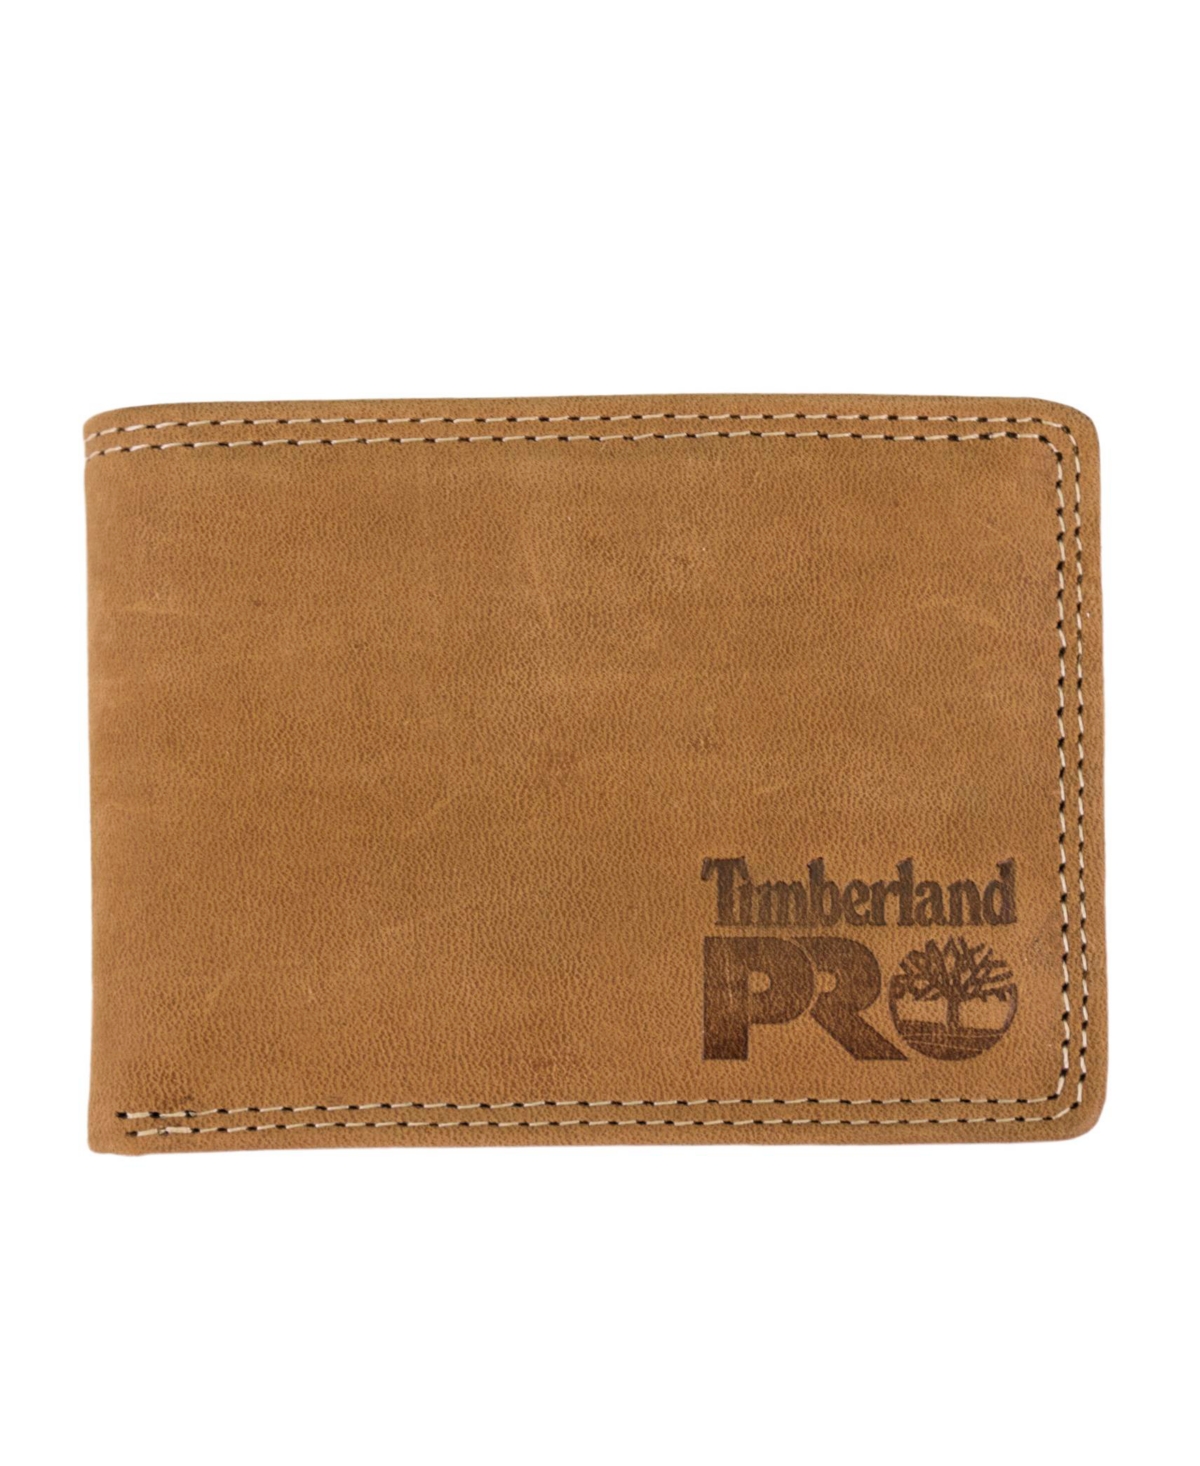 Timberland Pro Men's Pullman Passcase Wallet In Wheat